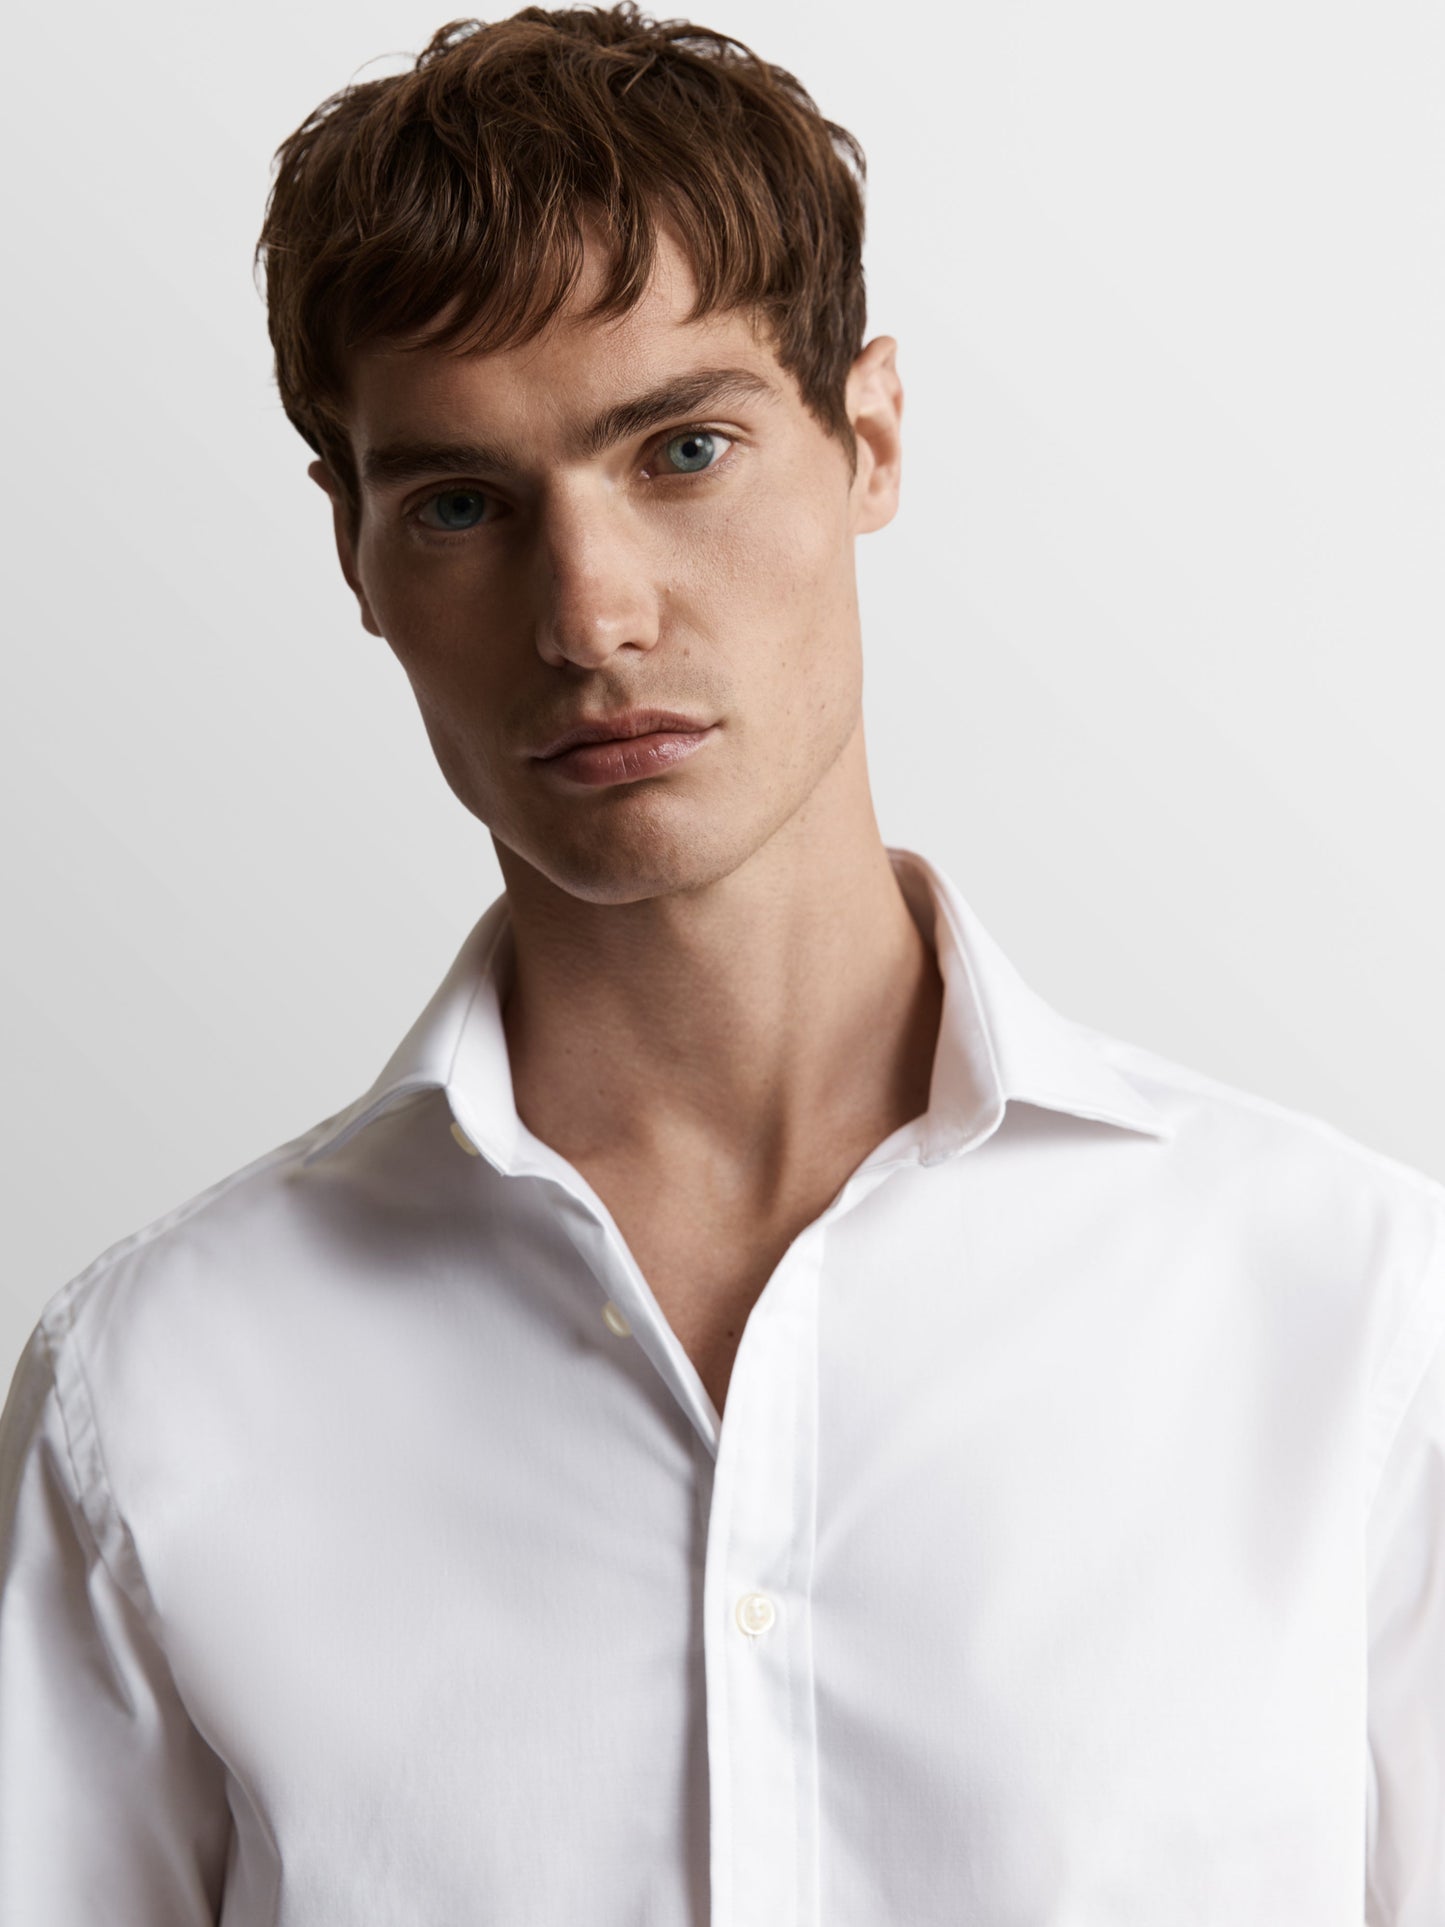 Non-Iron White Twill Fitted Double Cuff Classic Collar Shirt